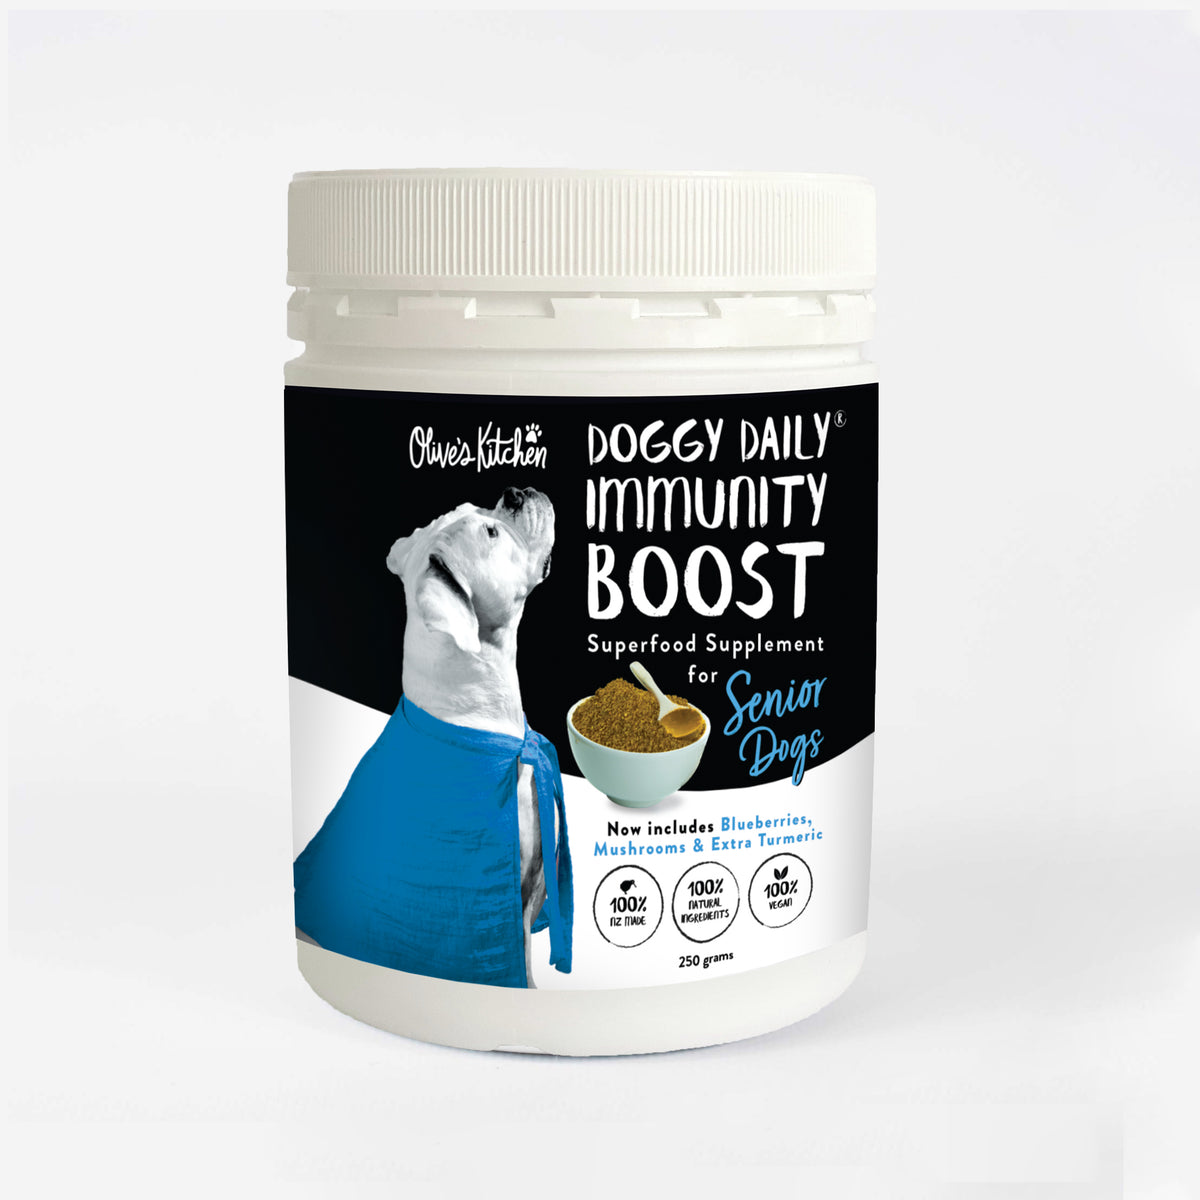 Doggy Daily Immunity Boost for SENIOR Dogs - 250g